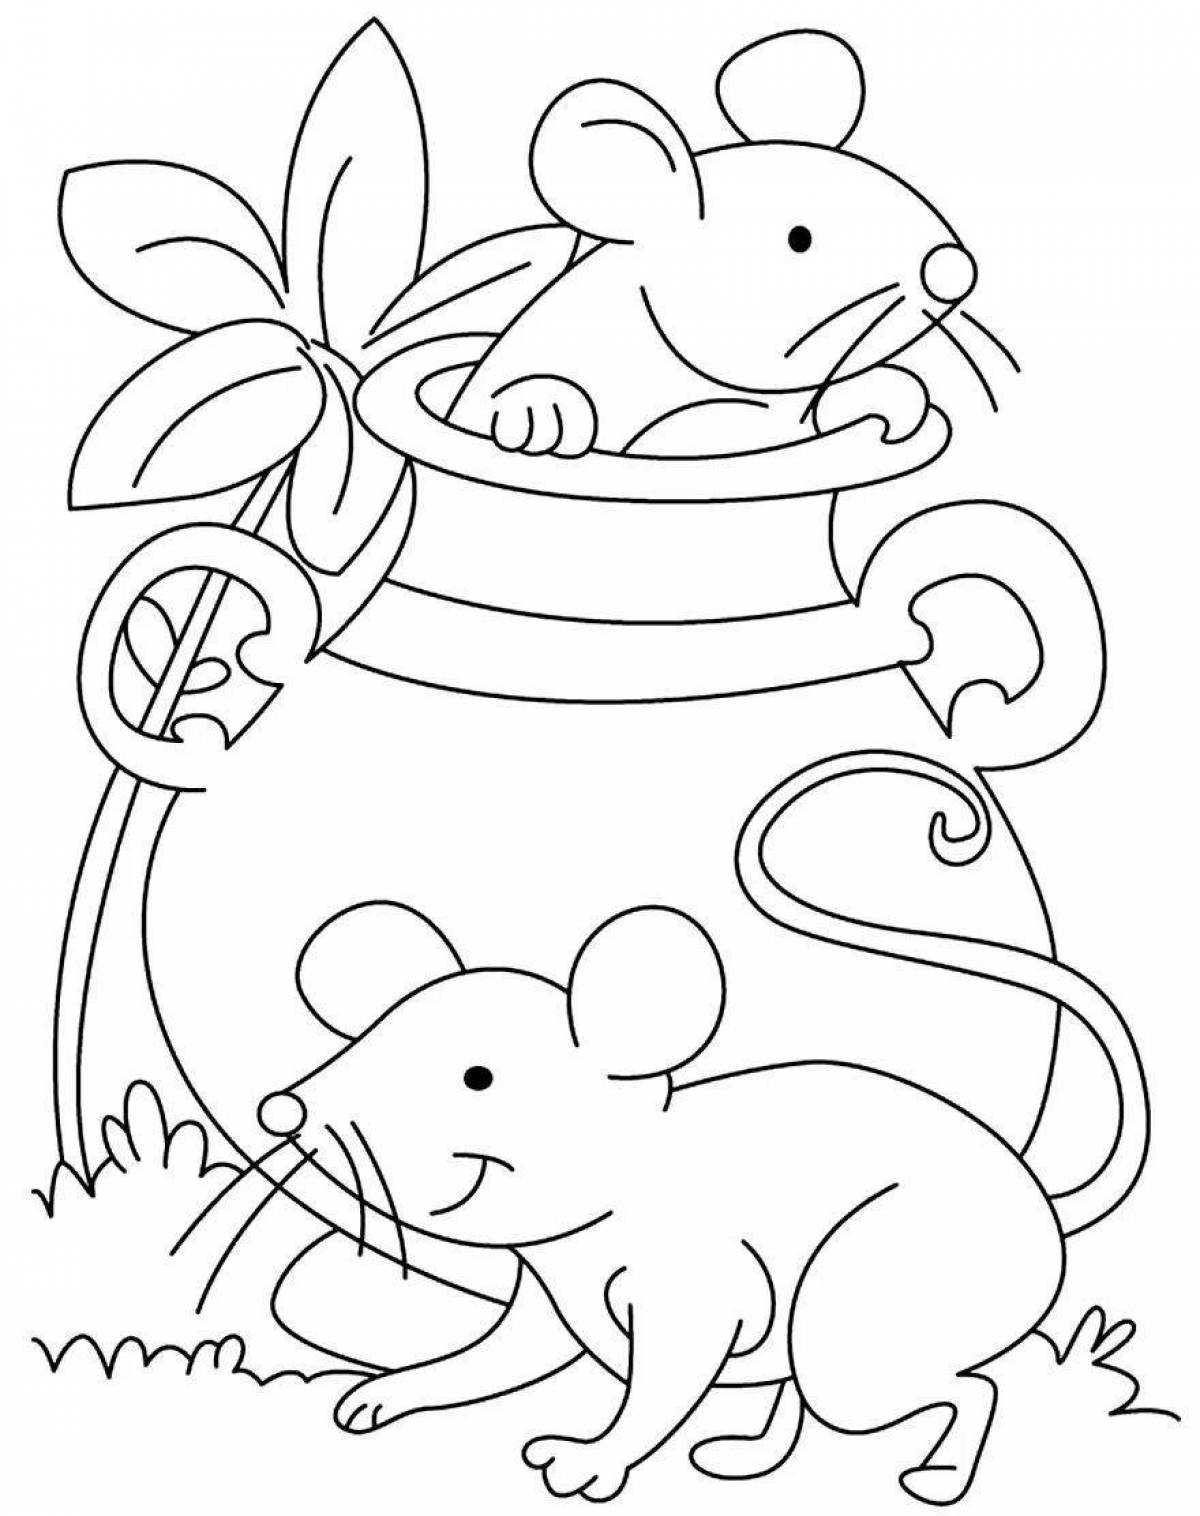 Colorful mouse coloring page for kids